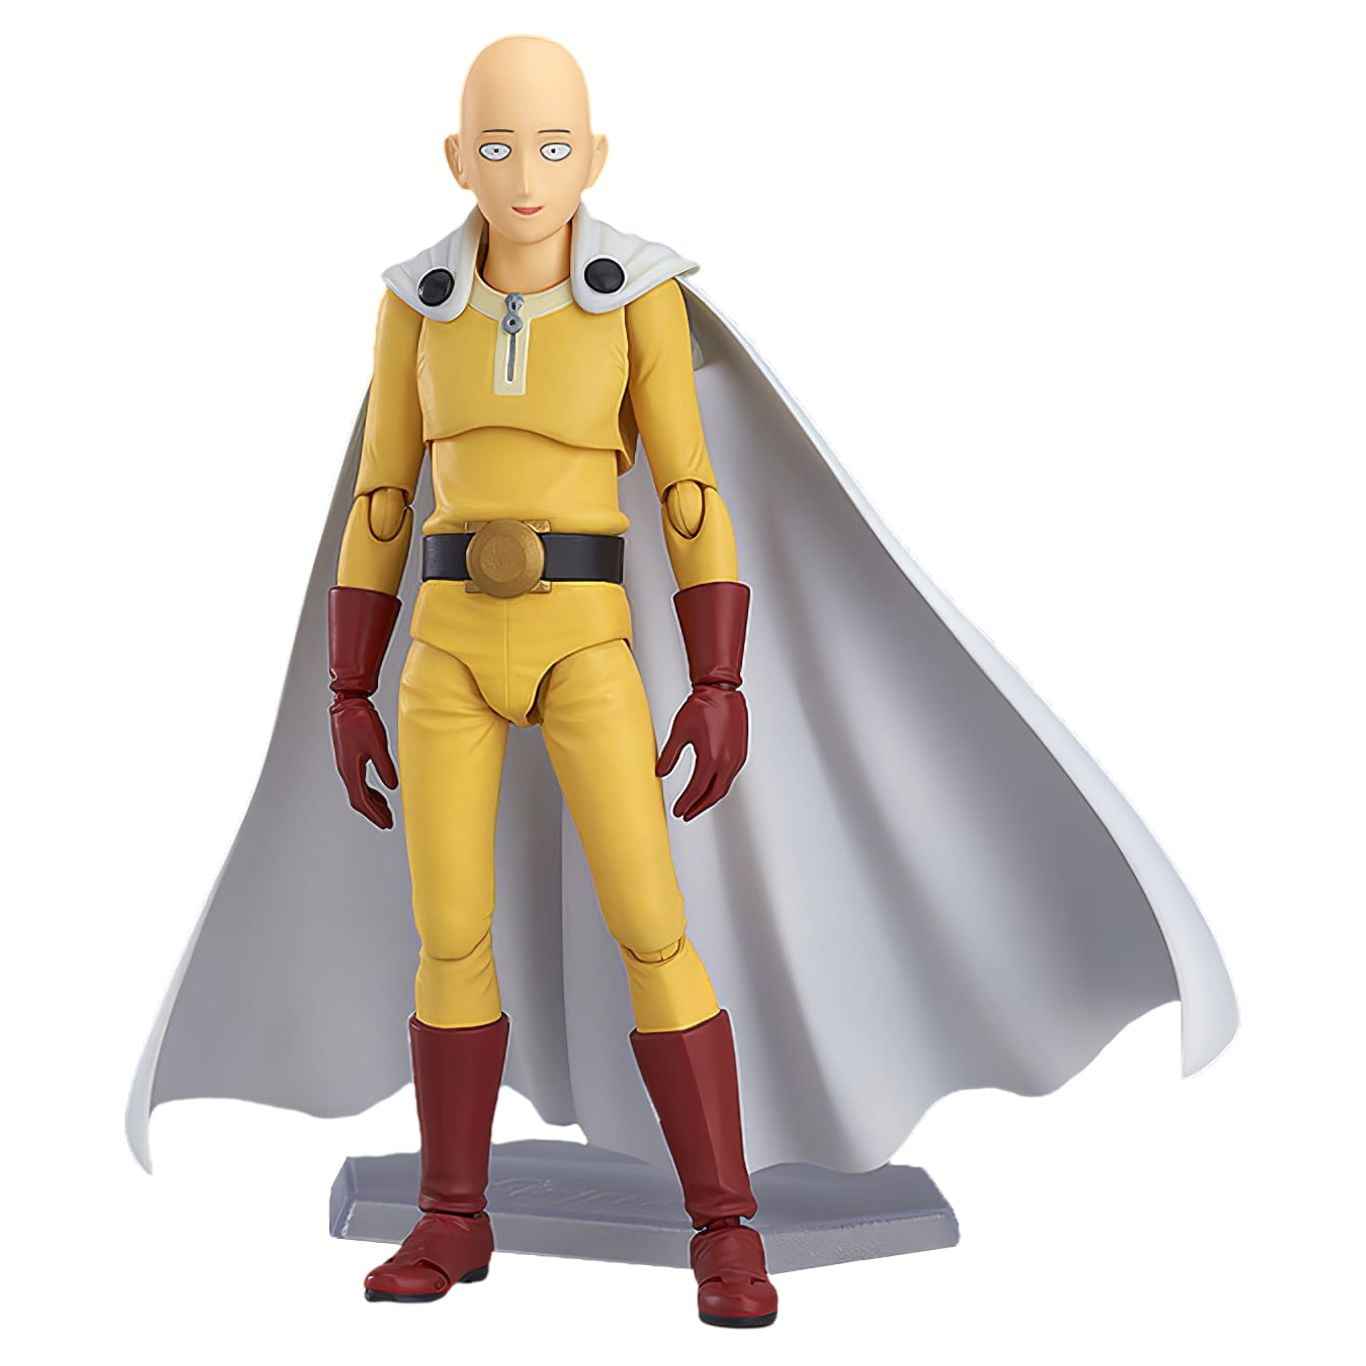 GREAT TOYS Dasin anime ONE PUNCH MAN Saitama Genos action figure GT model  toy 1/12